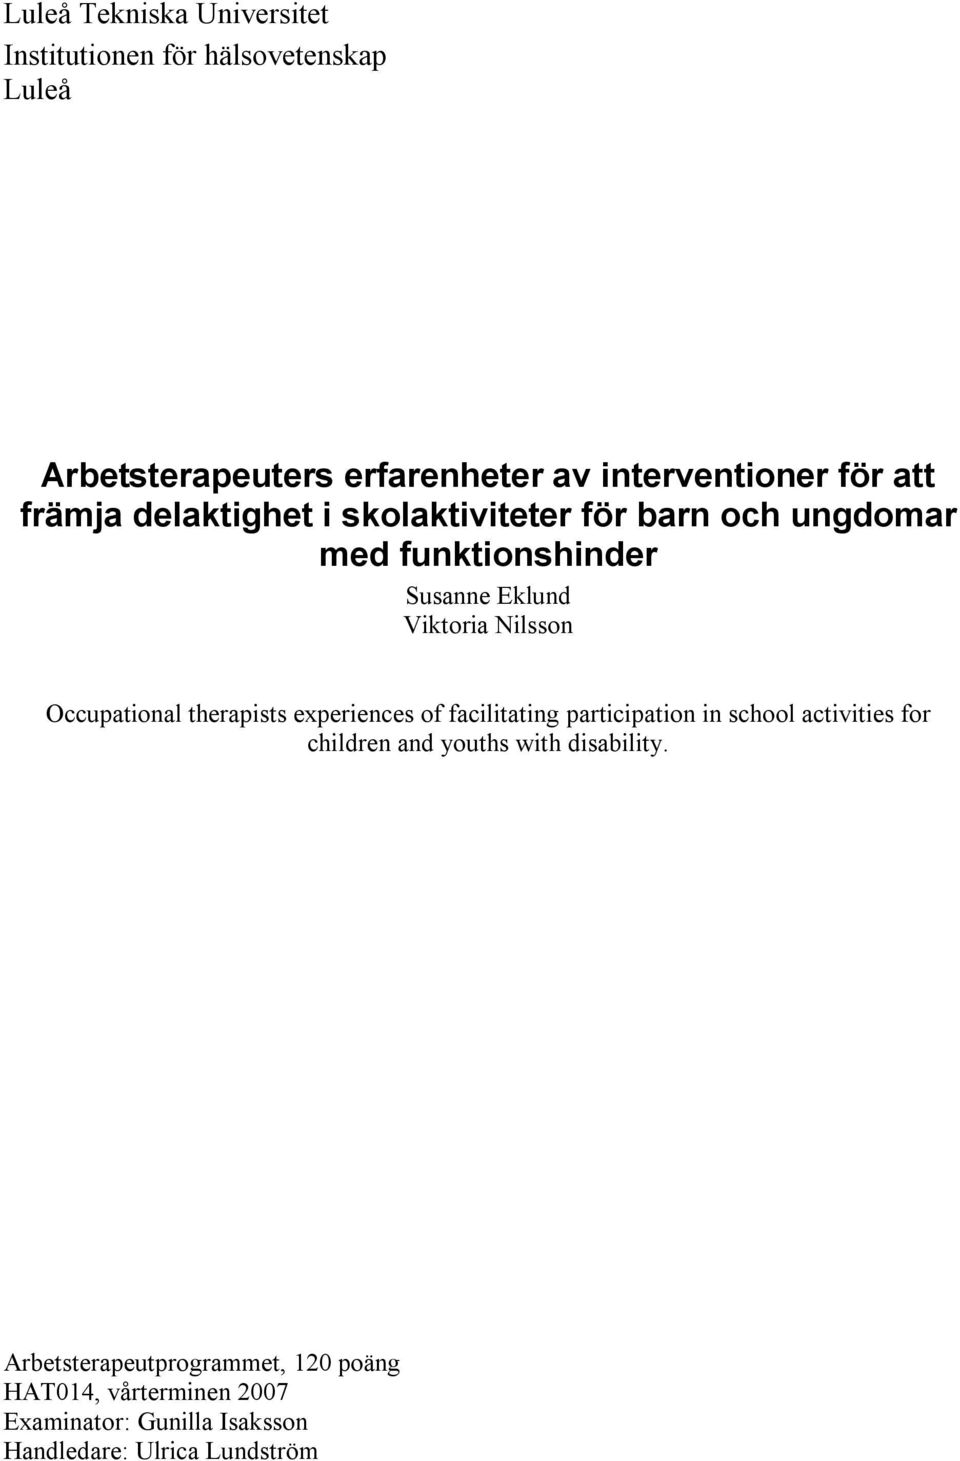 Occupational therapists experiences of facilitating participation in school activities for children and youths with